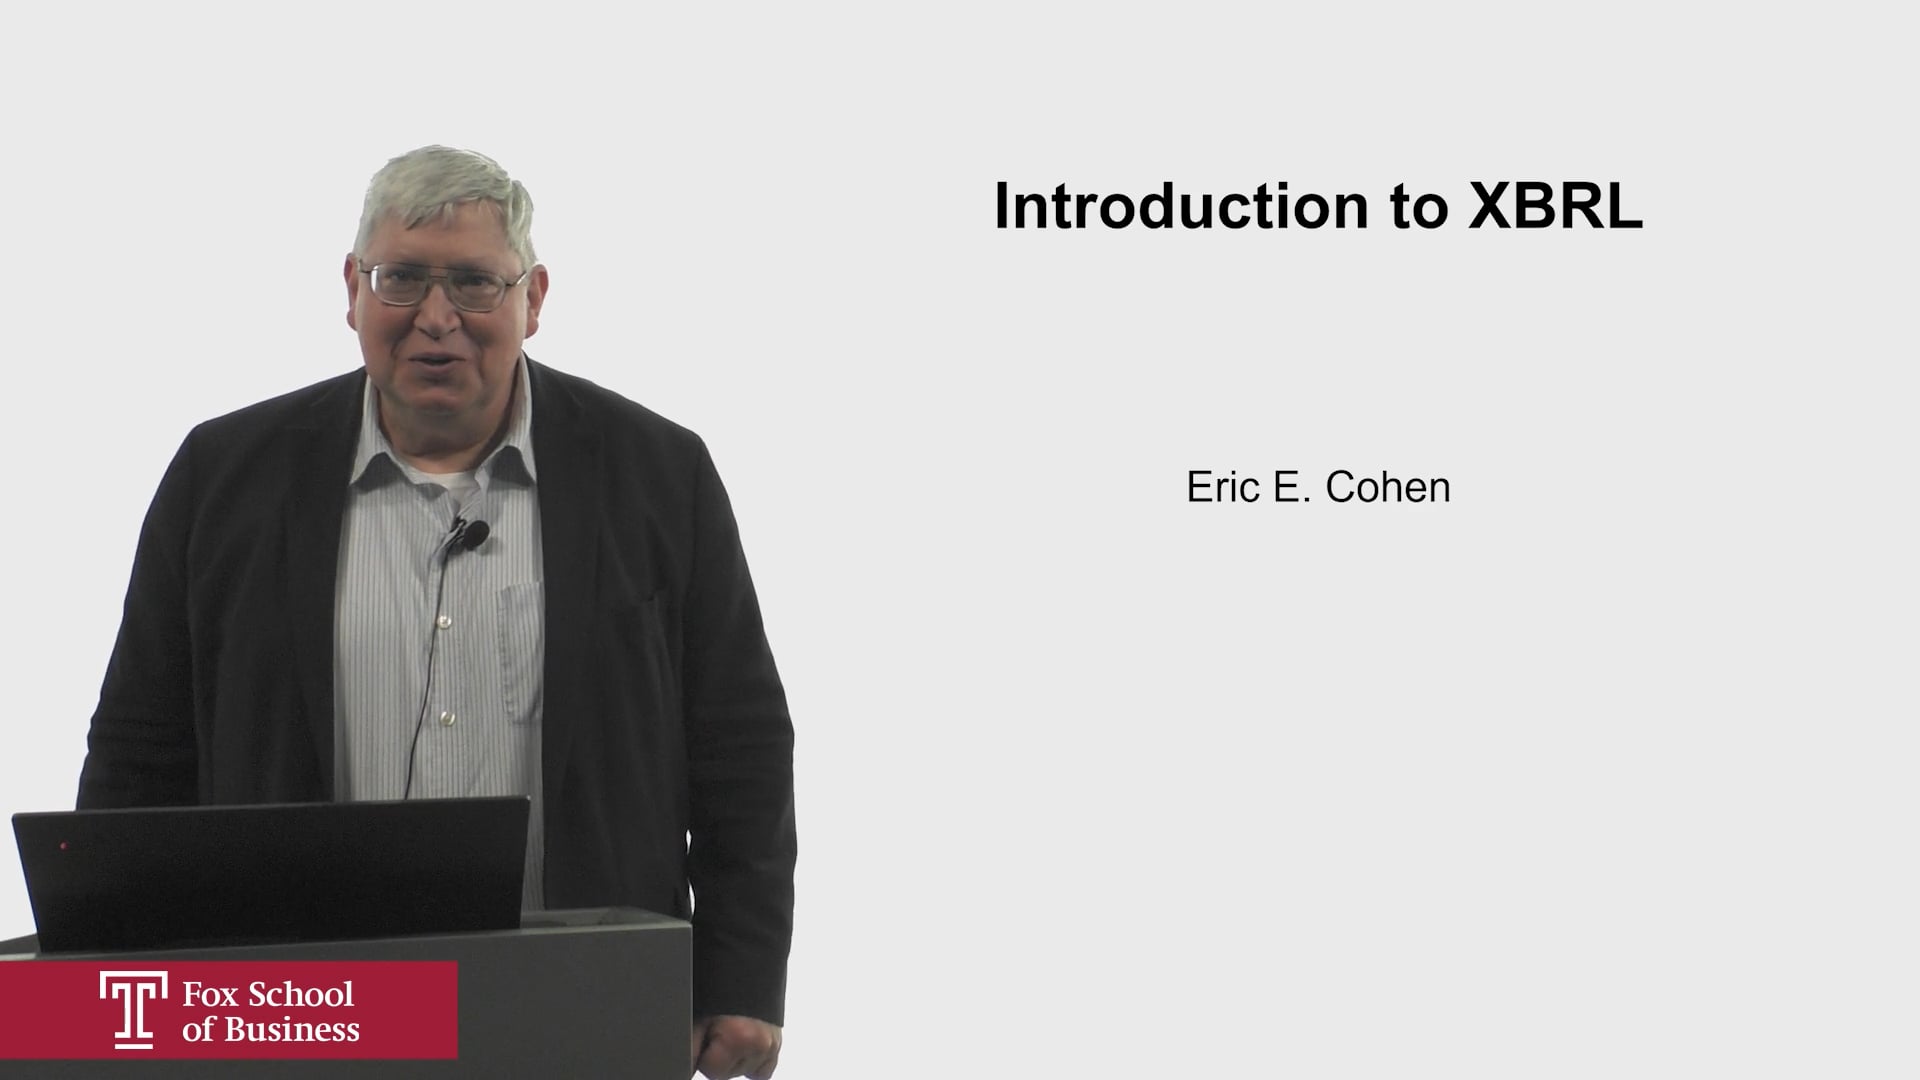 Introduction to XBRL